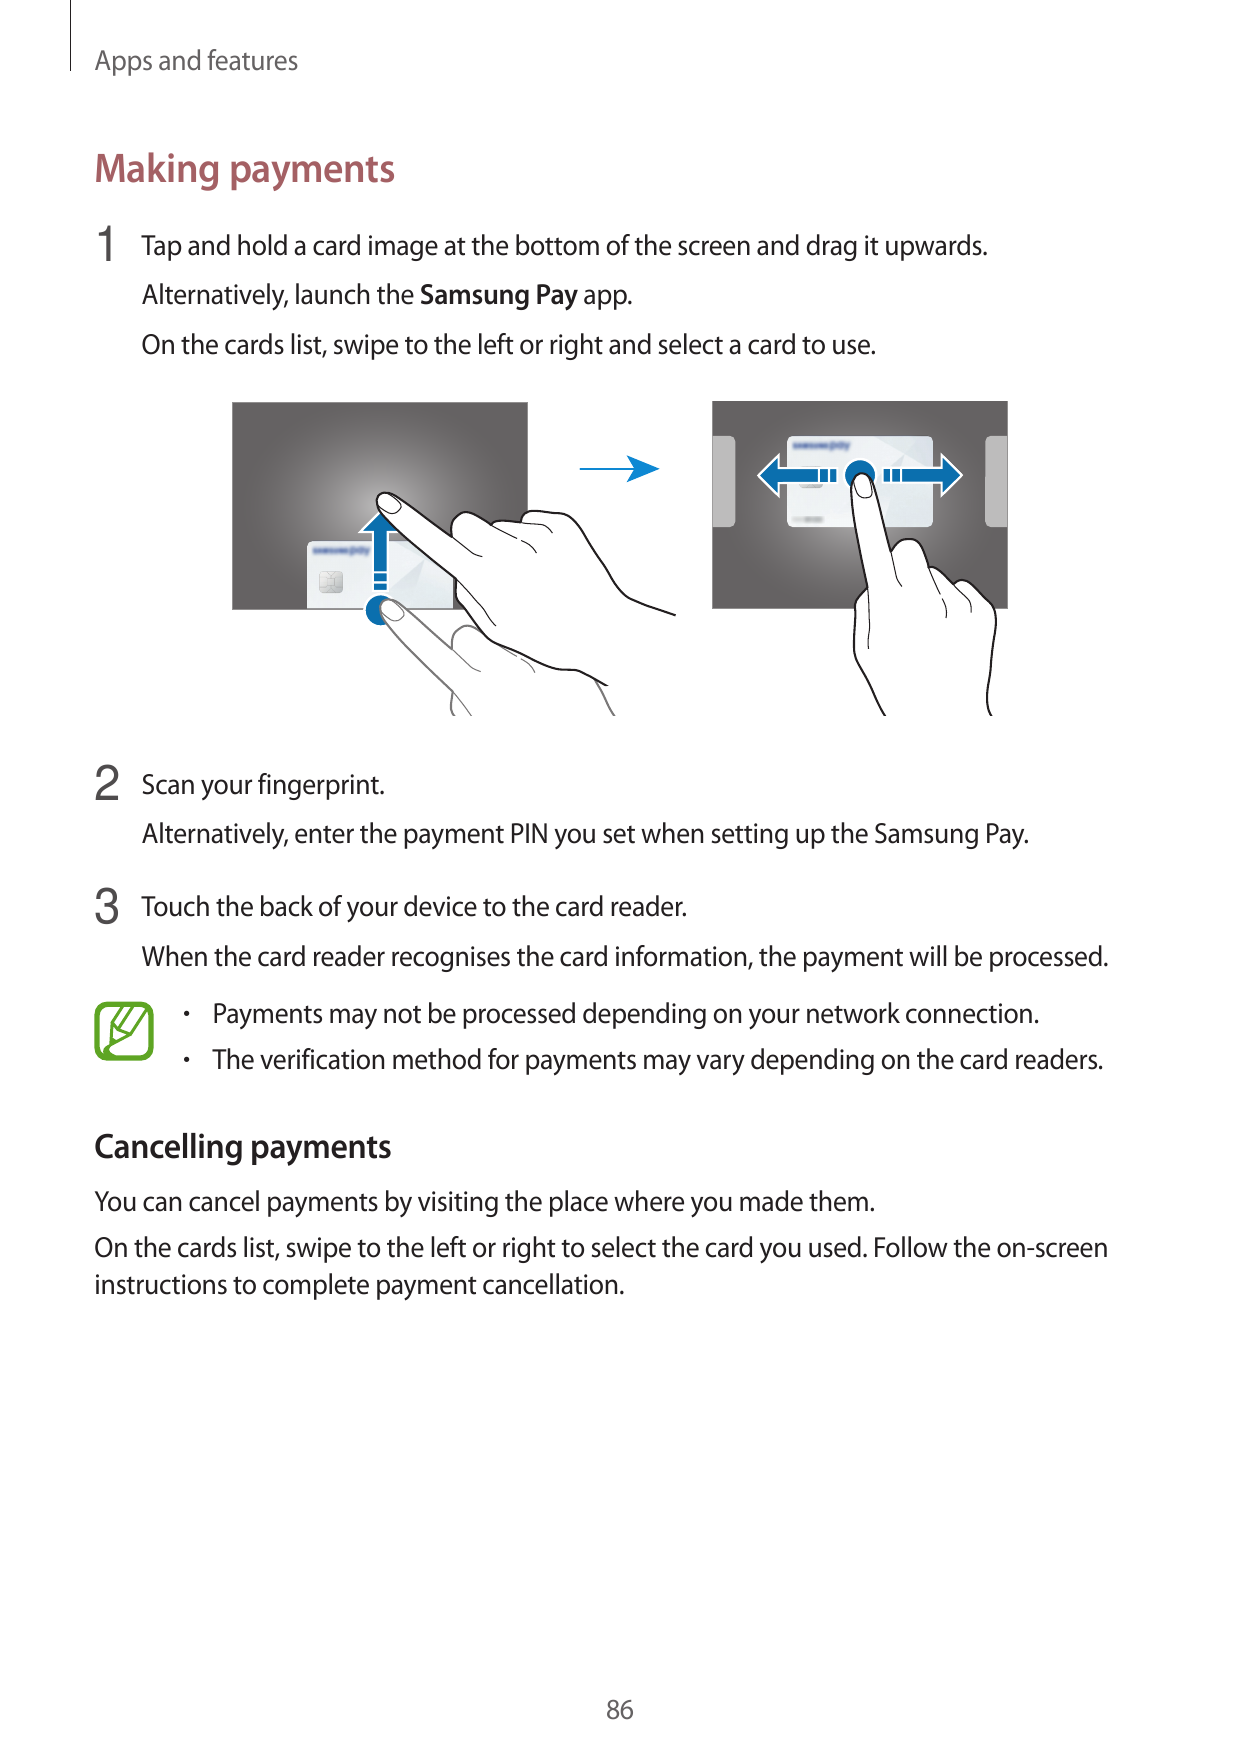 Apps and featuresMaking payments1 Tap and hold a card image at the bottom of the screen and drag it upwards.Alternatively, launc